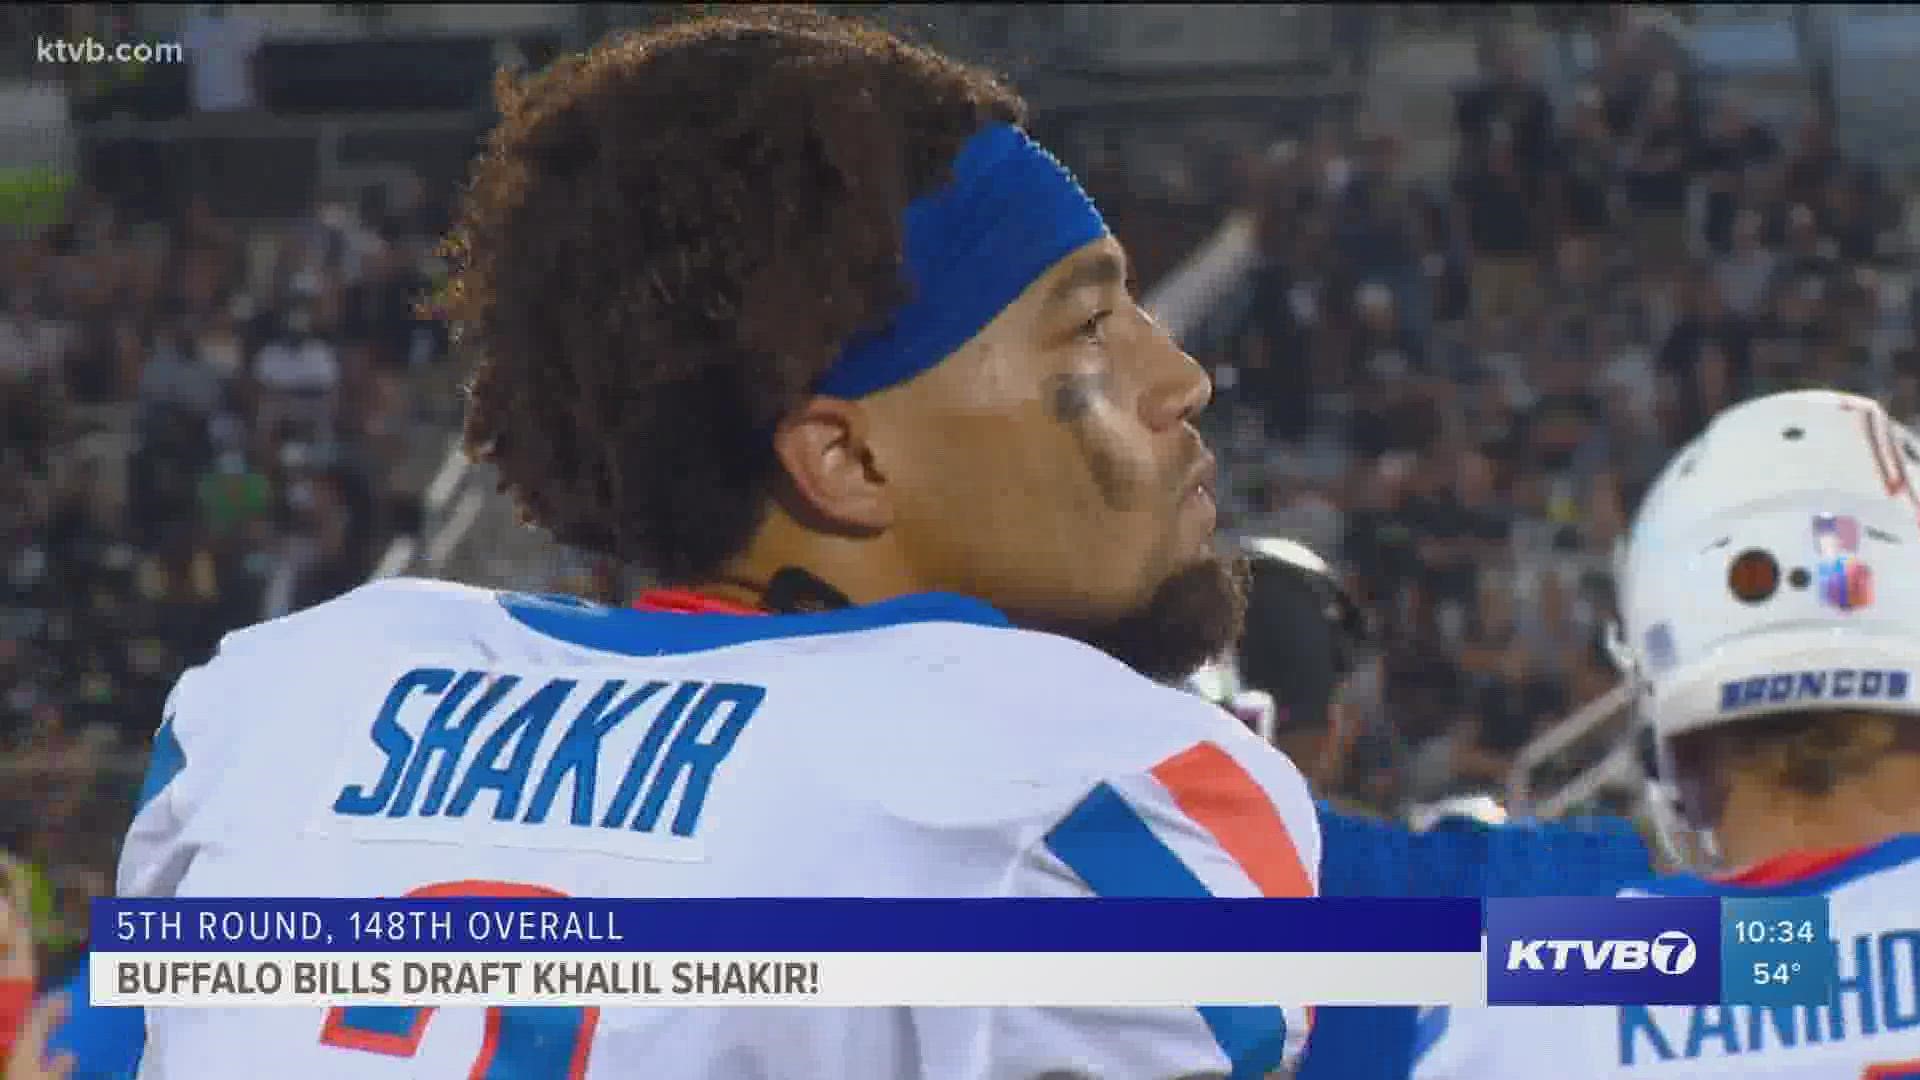 Former Boise State wide receiver Khalil Shakir drafted to Buffalo Bills